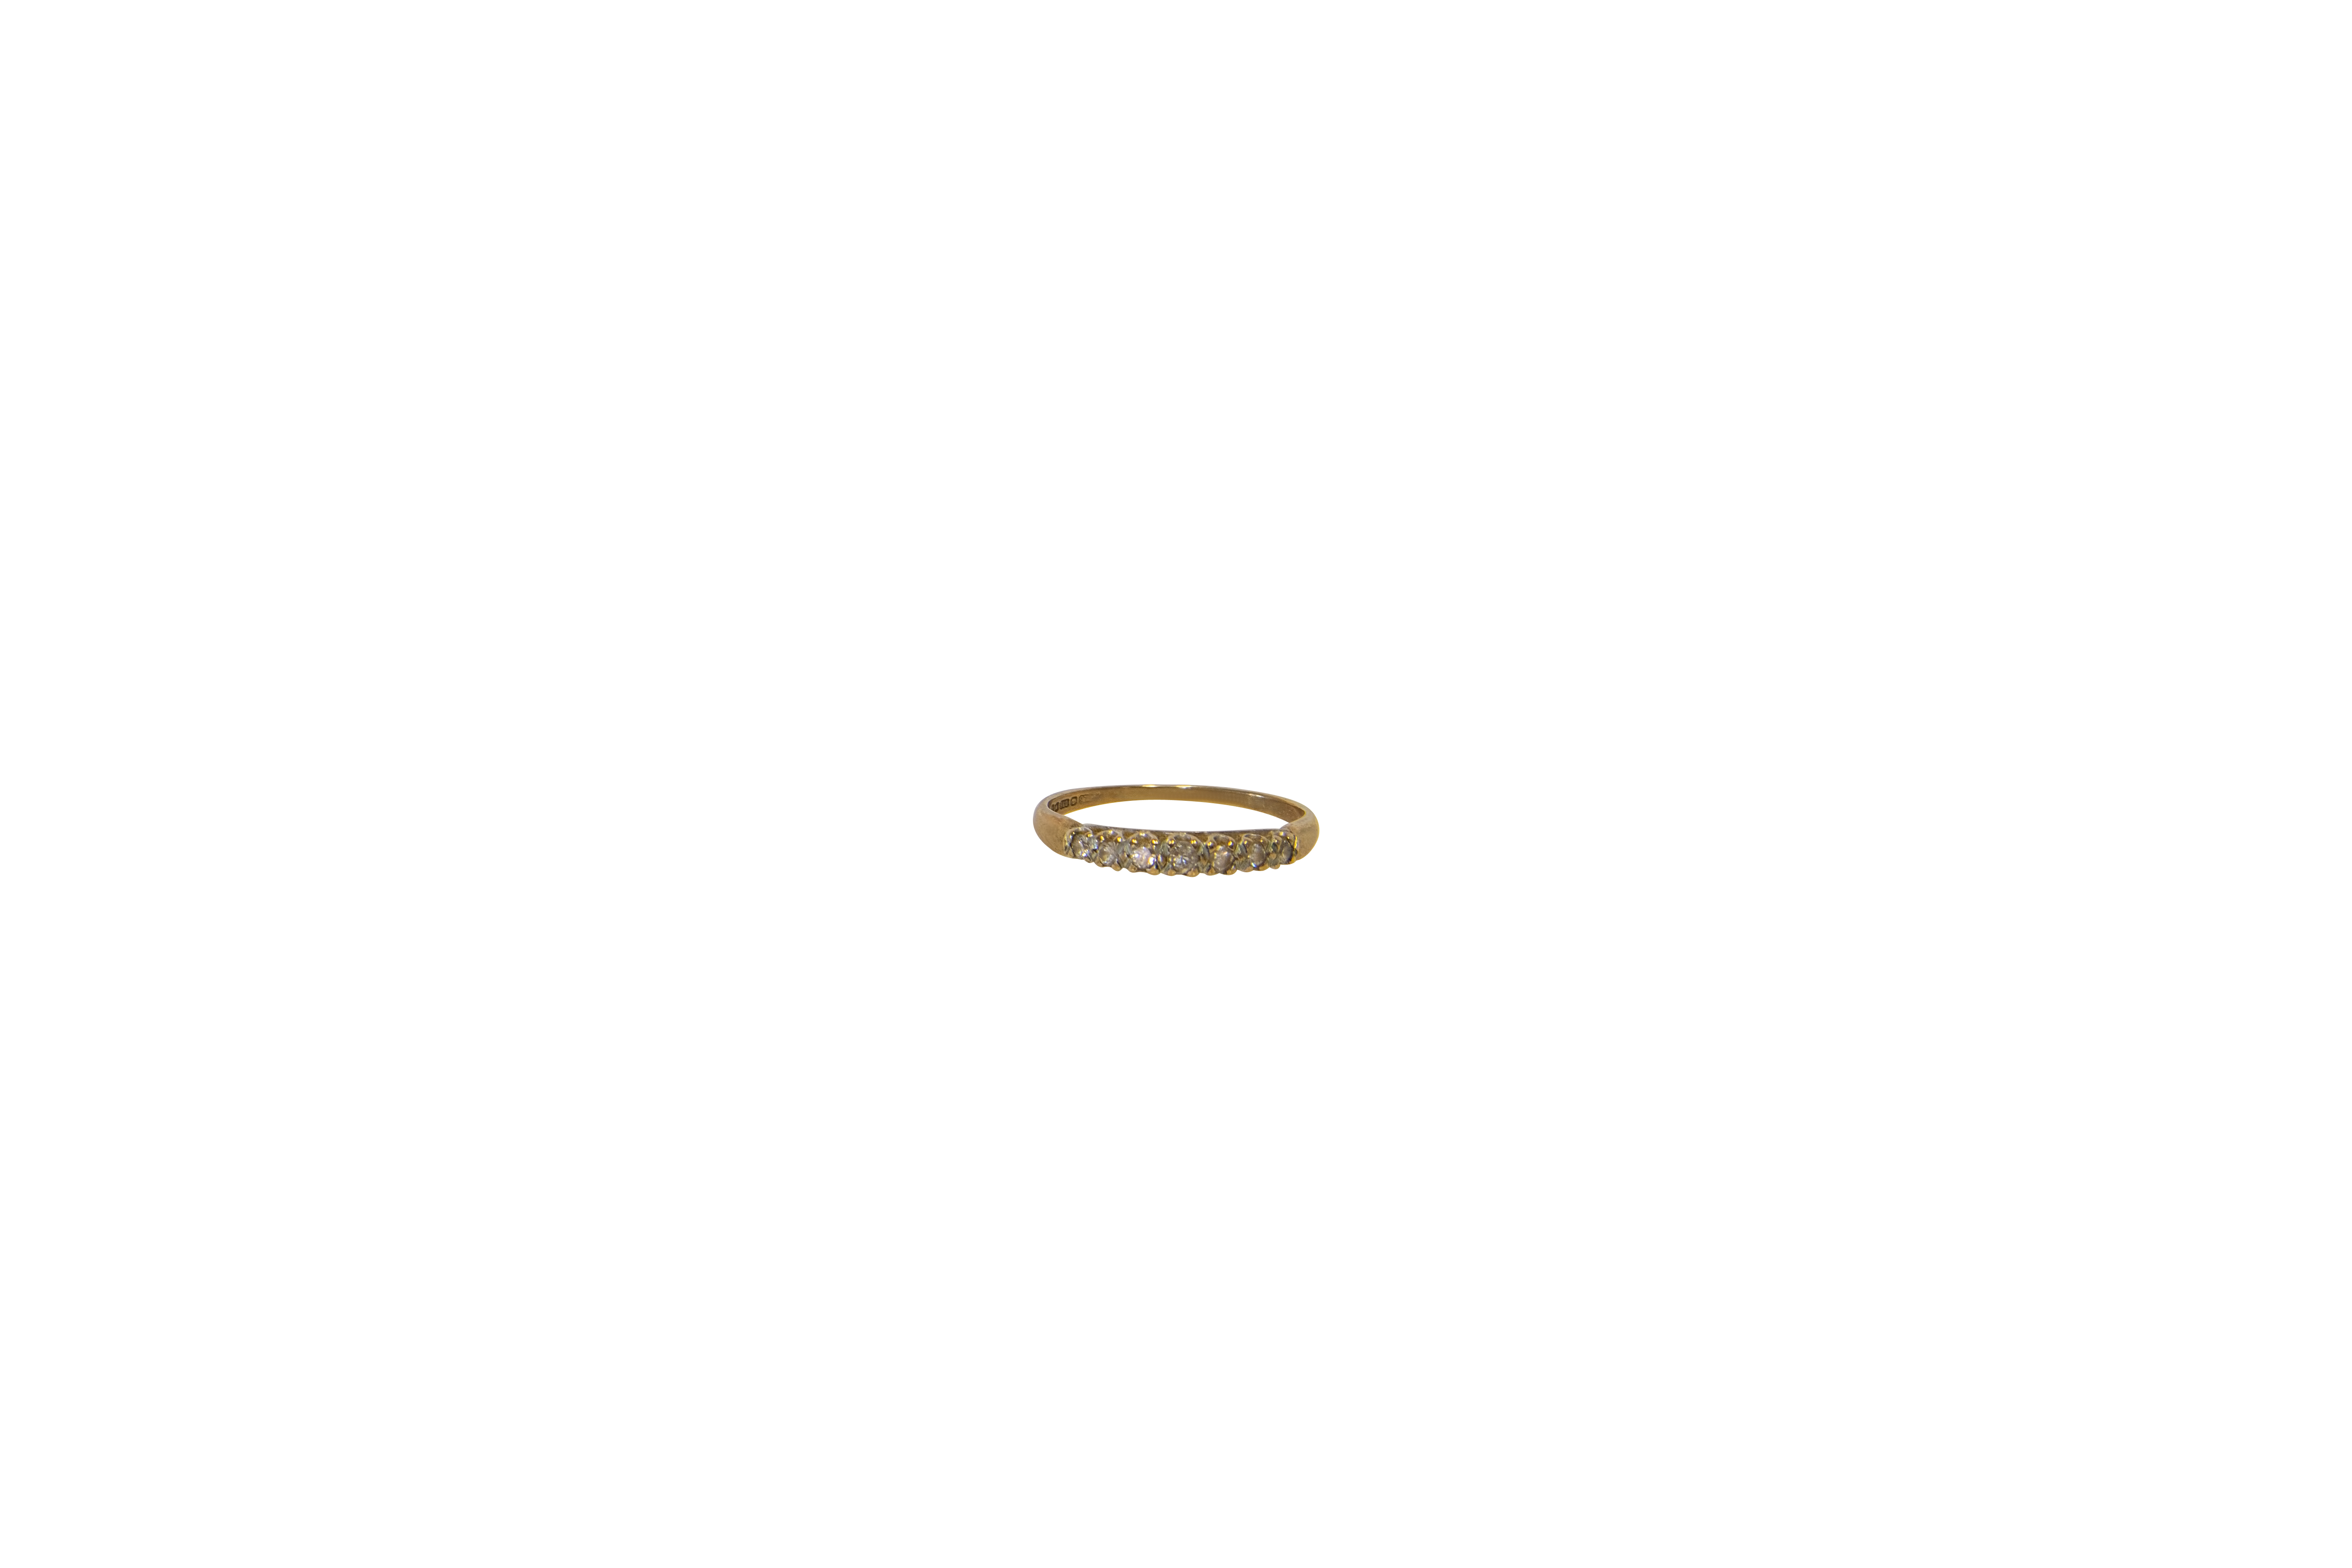 A Lady's white gold wedding ring. Gross weight approx. 1 gr. Size approx. 6 1/2.